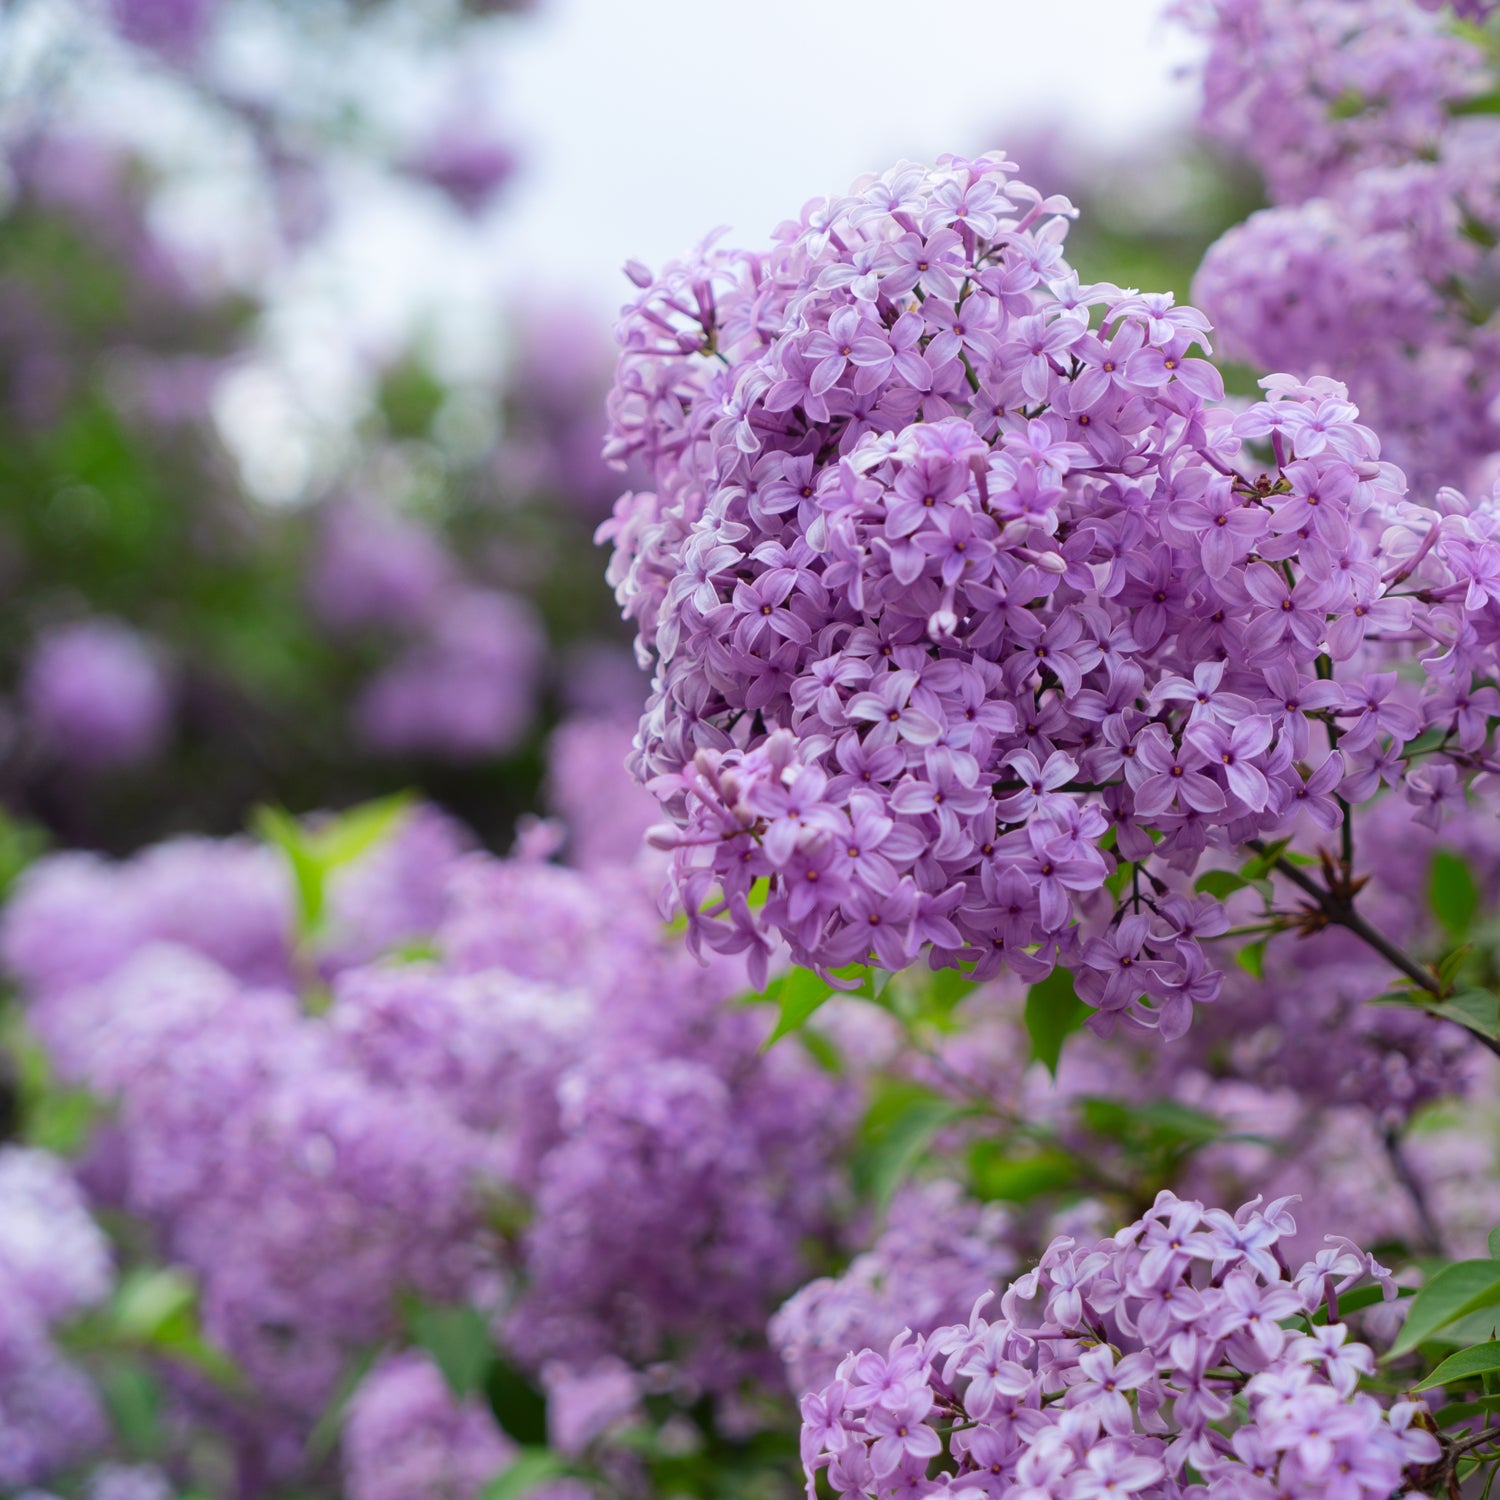 Lilac in the springtime - the inspiration for our "Lilac Blossom" snap bars